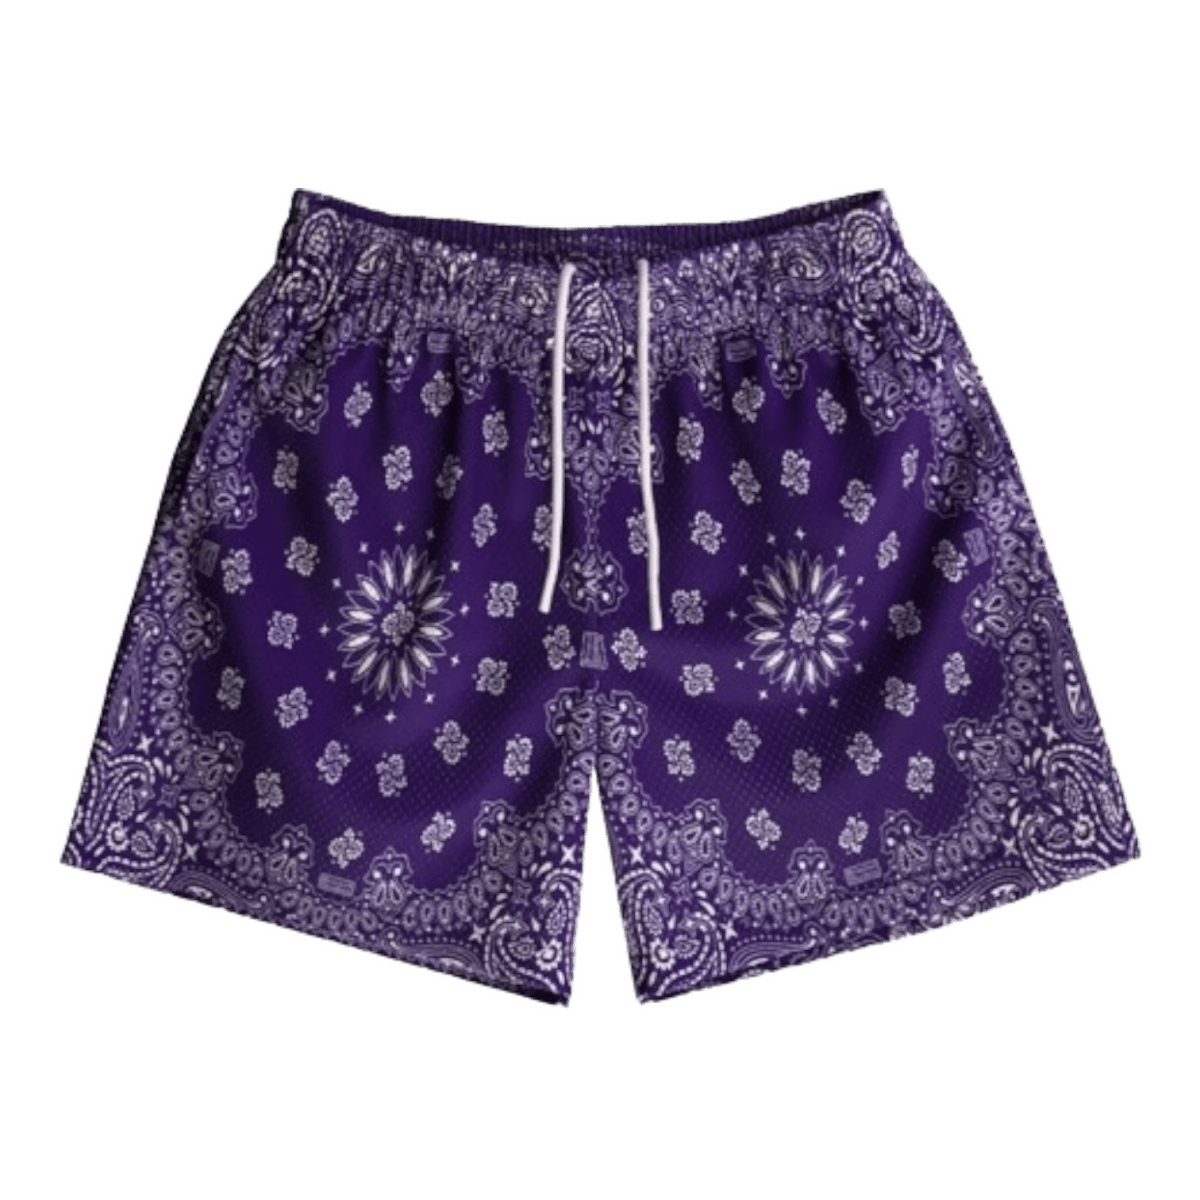 Bravest Studios Purple Paisley Player Shorts - Shorts - Jawns on Fire Sneakers & Streetwear